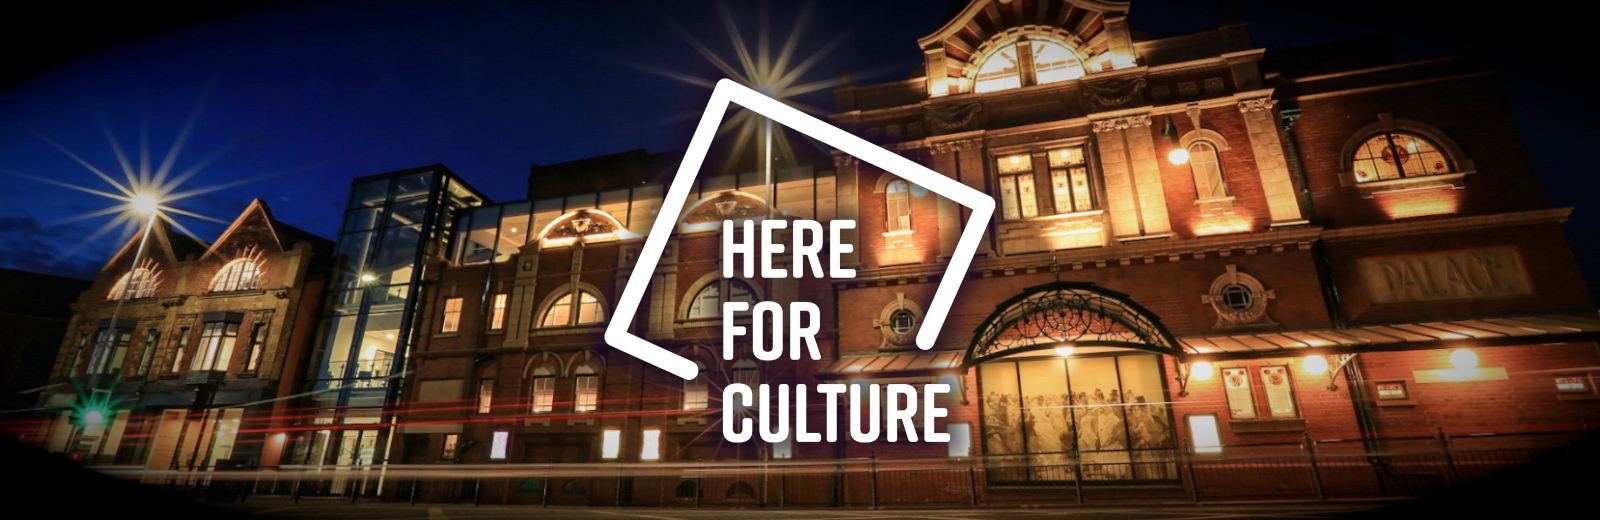 DARLINGTON HIPPODROME TO RECEIVE £198,461 FROM THIRD ROUND OF THE GOVERNMENT’S CULTURE RECOVERY FUND